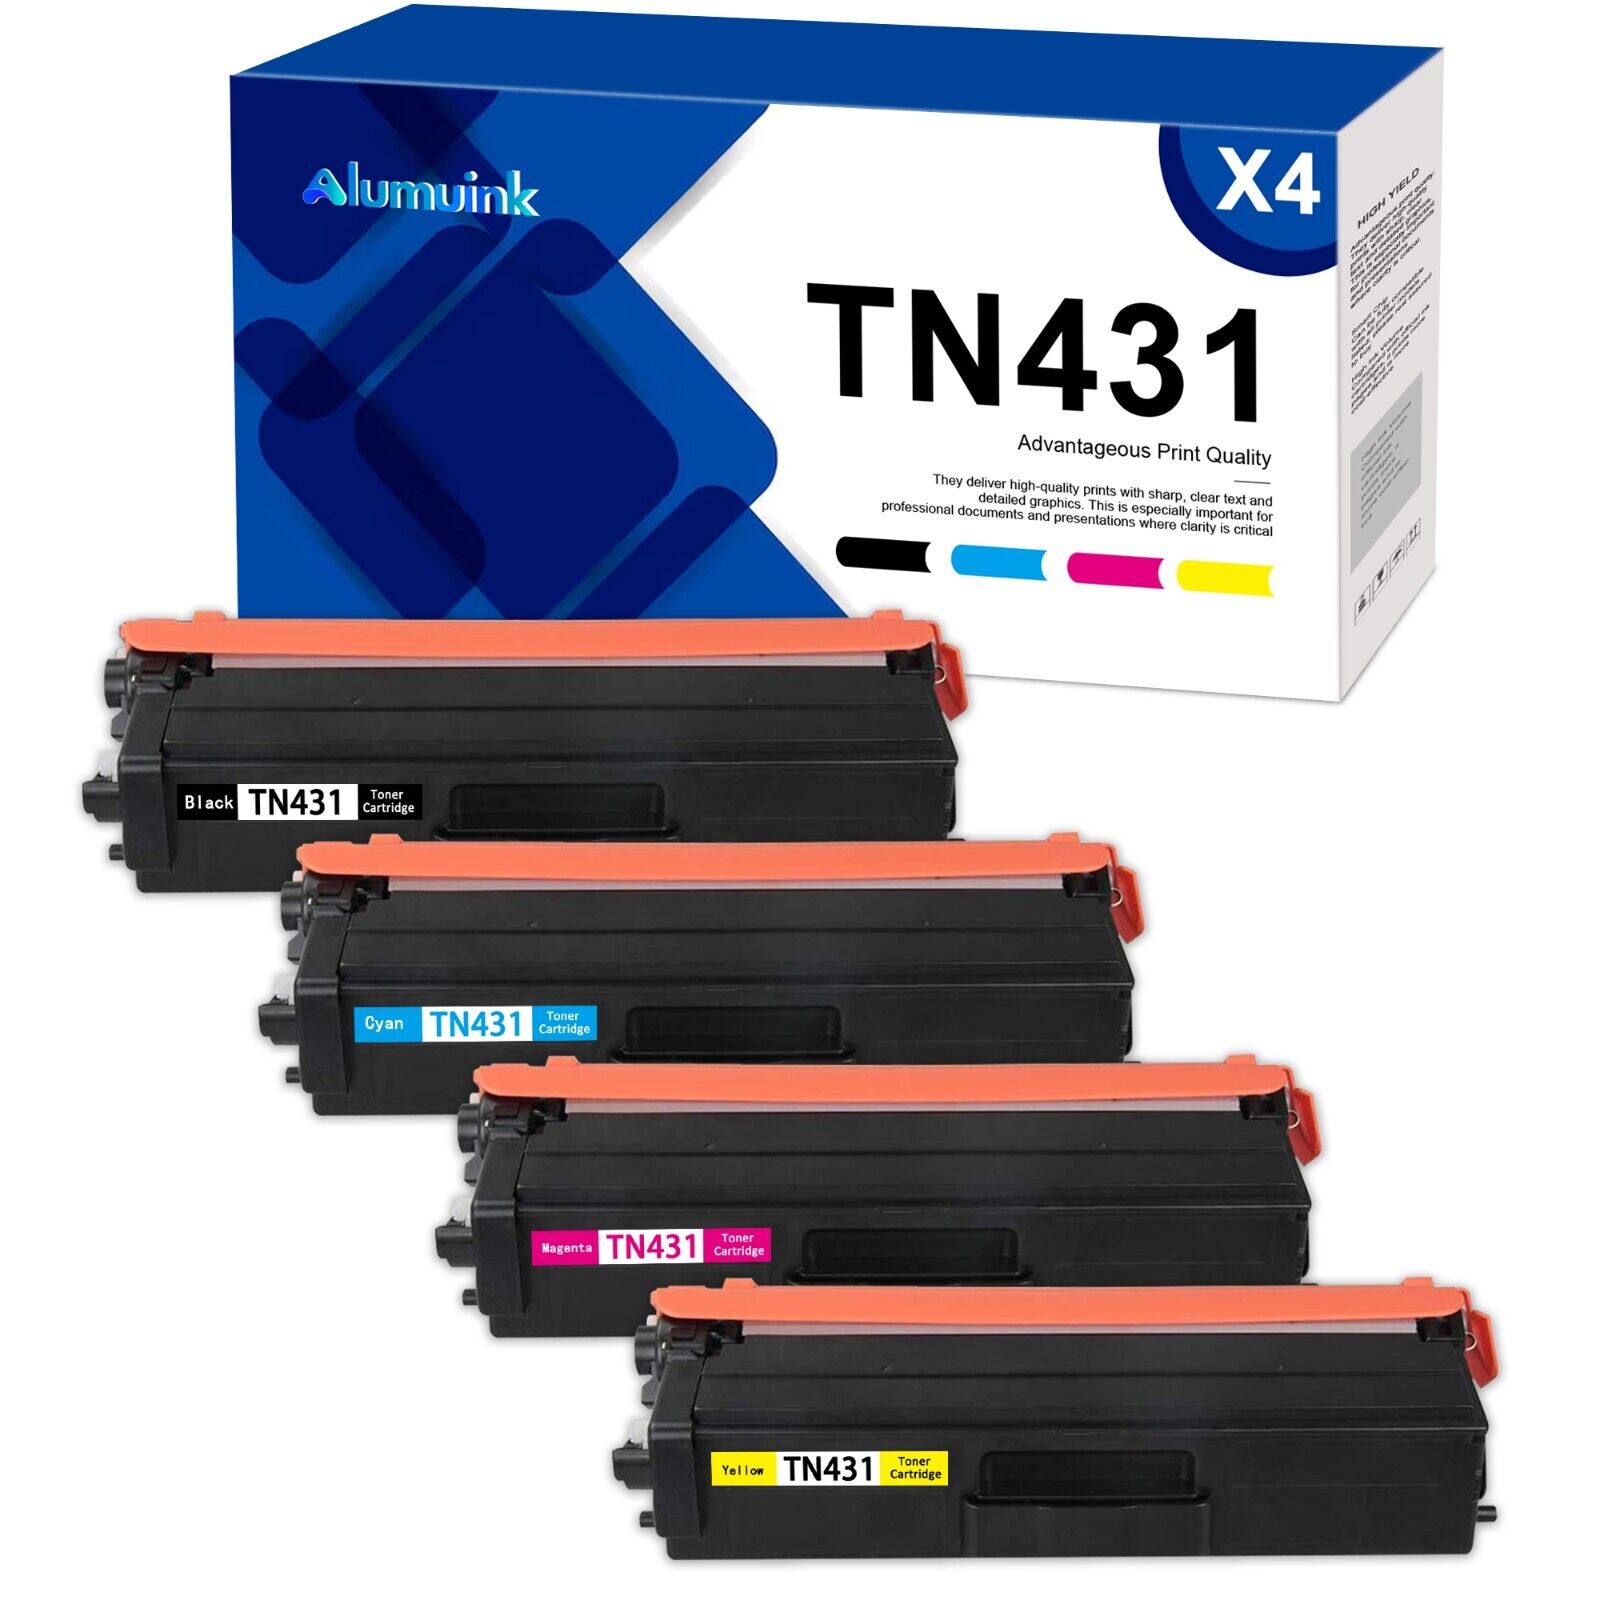 High Yield TN431 Toner Replacement for Brother HL-L8260CDW (BK/C/M/Y, 4 Pack)